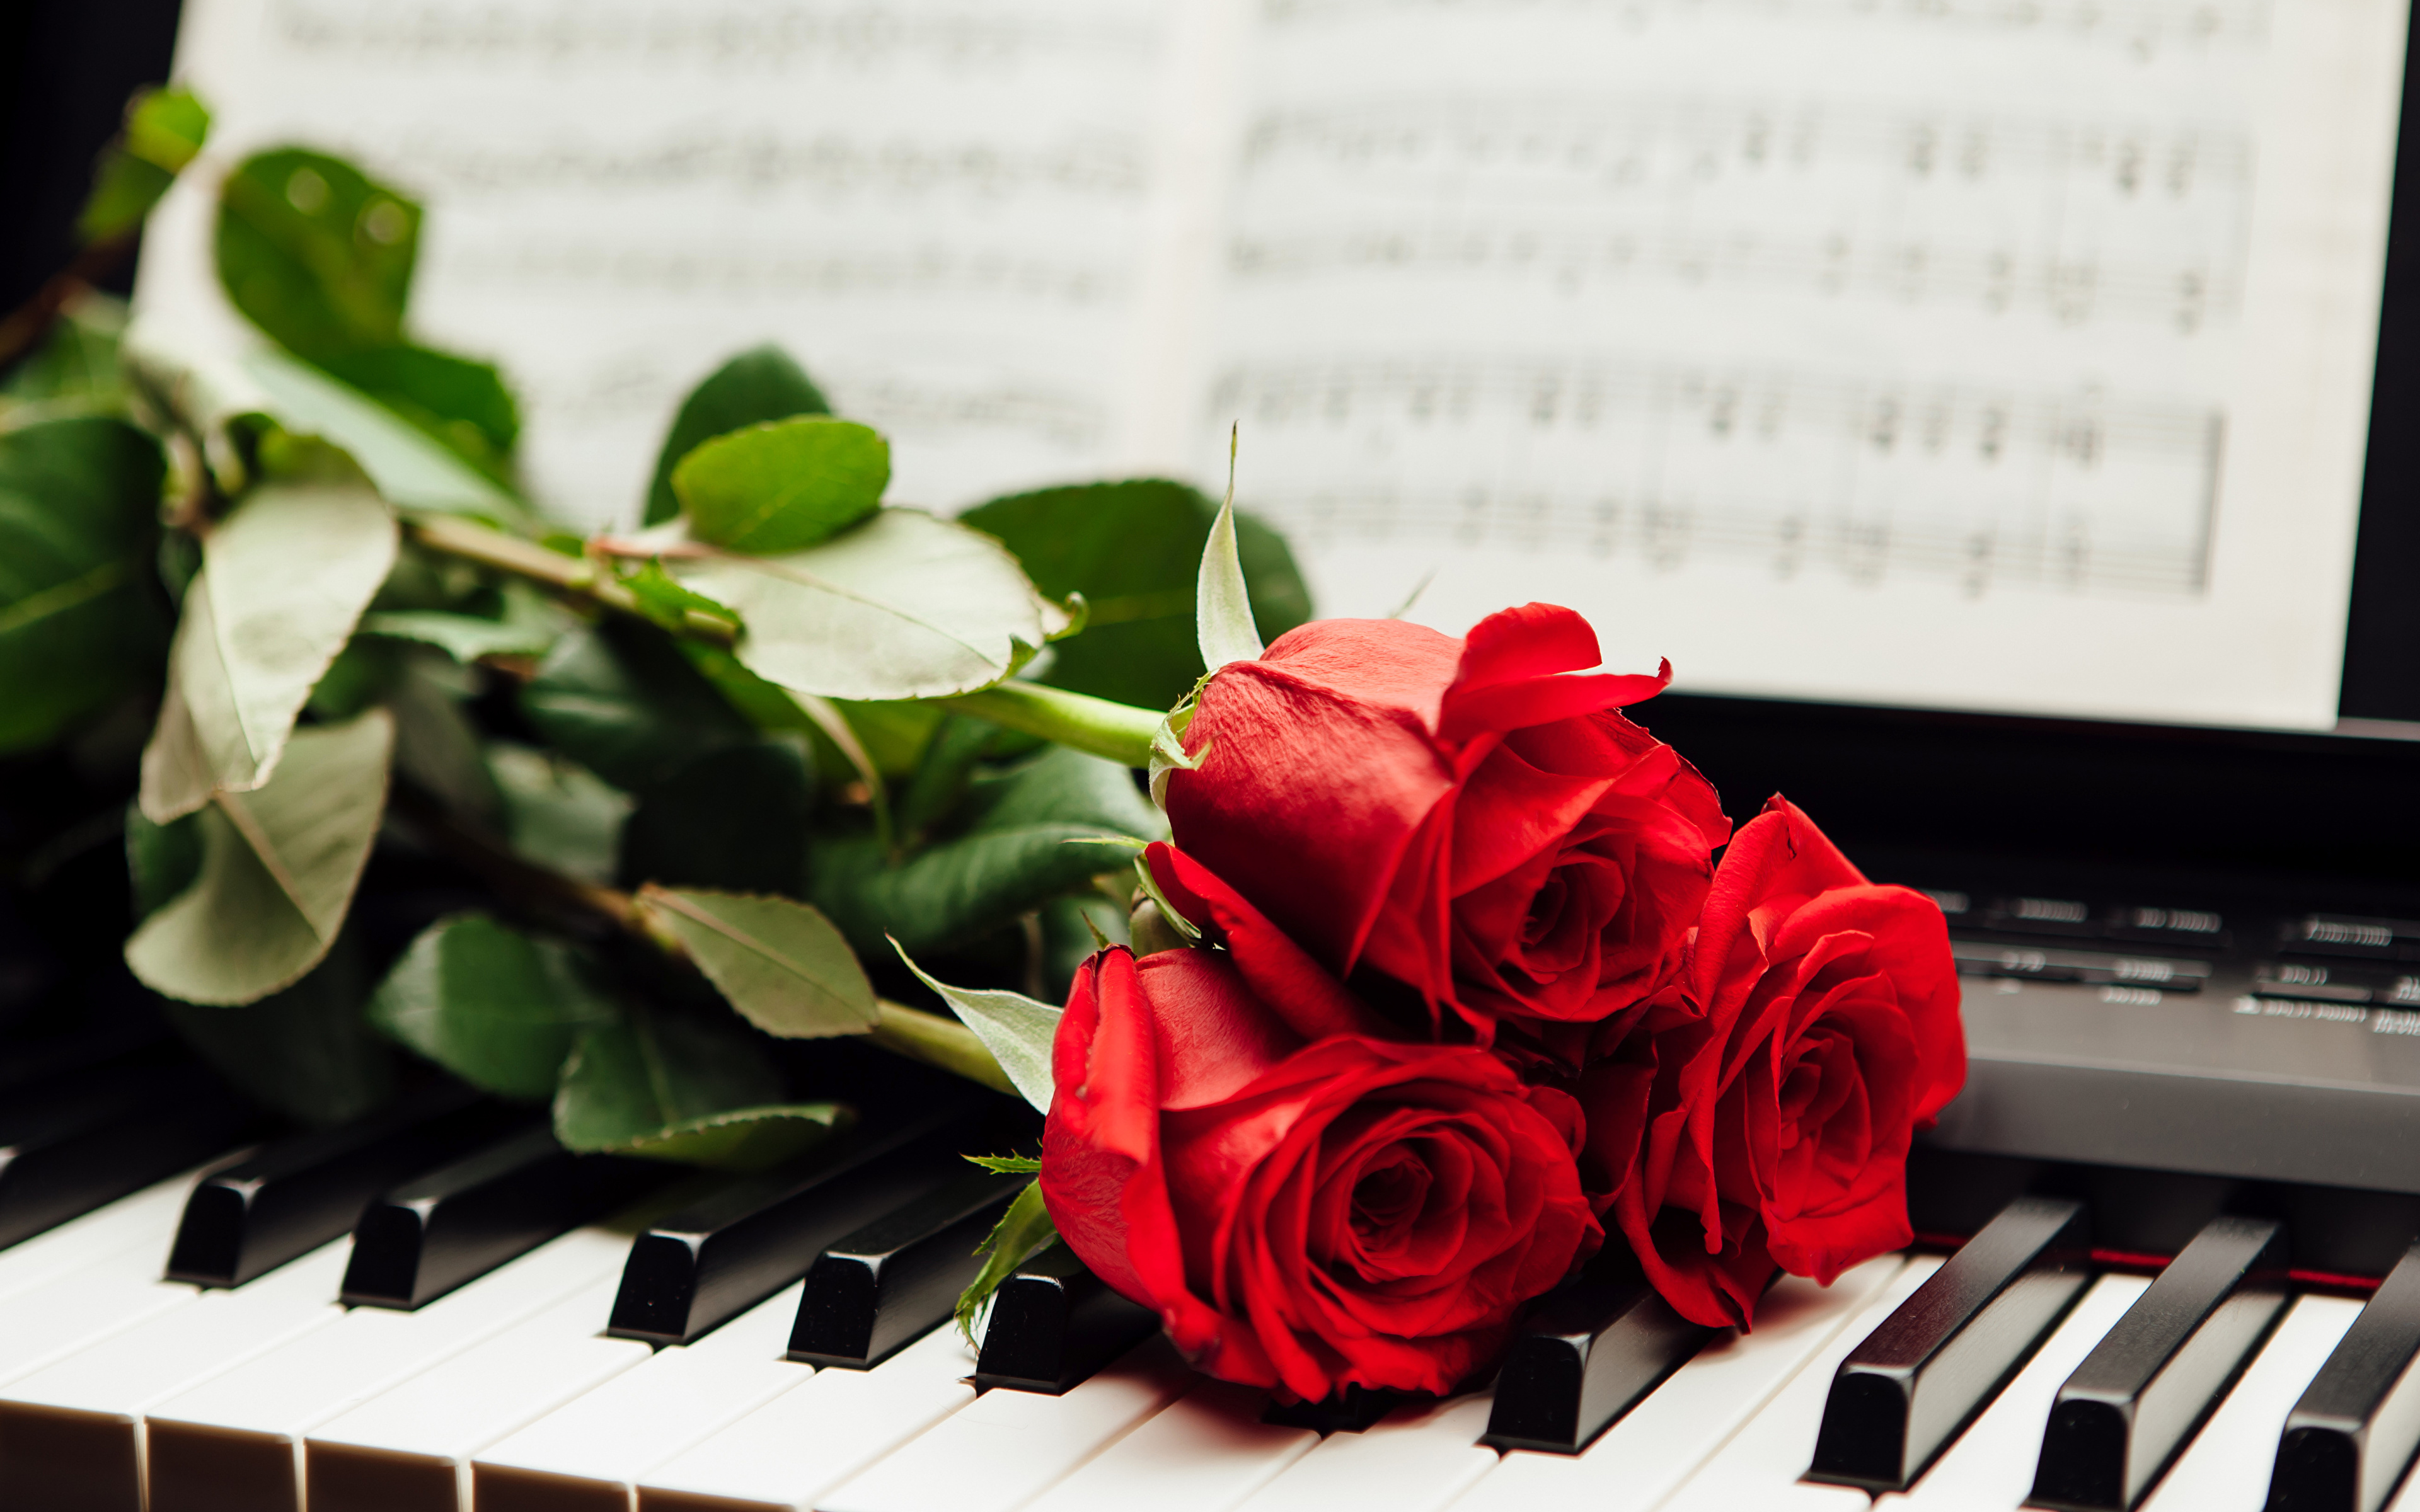 Piano Flowers Wallpapers